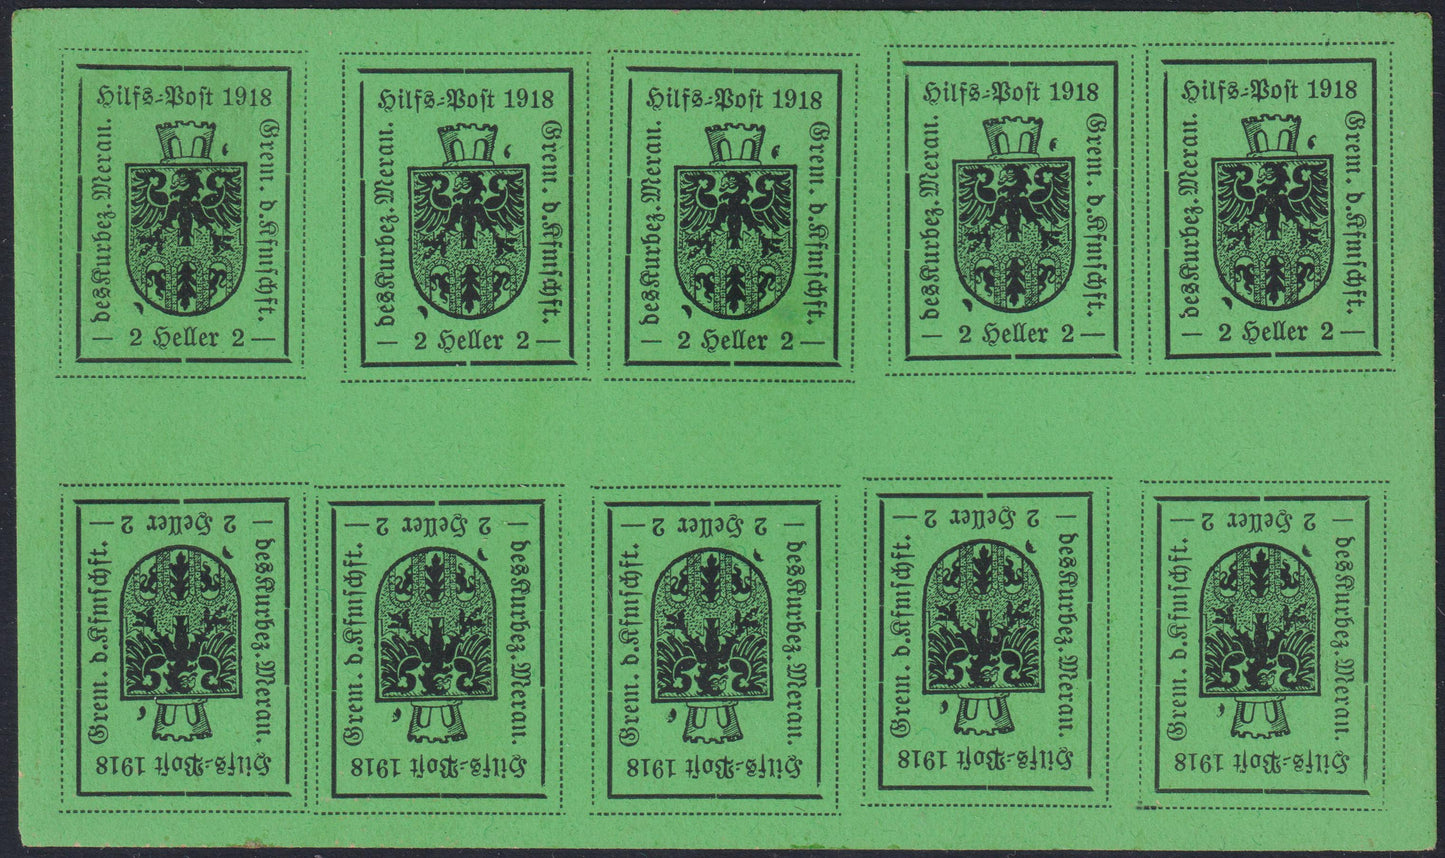 MER17 - Merano, 2 light green heller typographical print of the first type, minisheet of 10 copies, new with intact gum (4A).